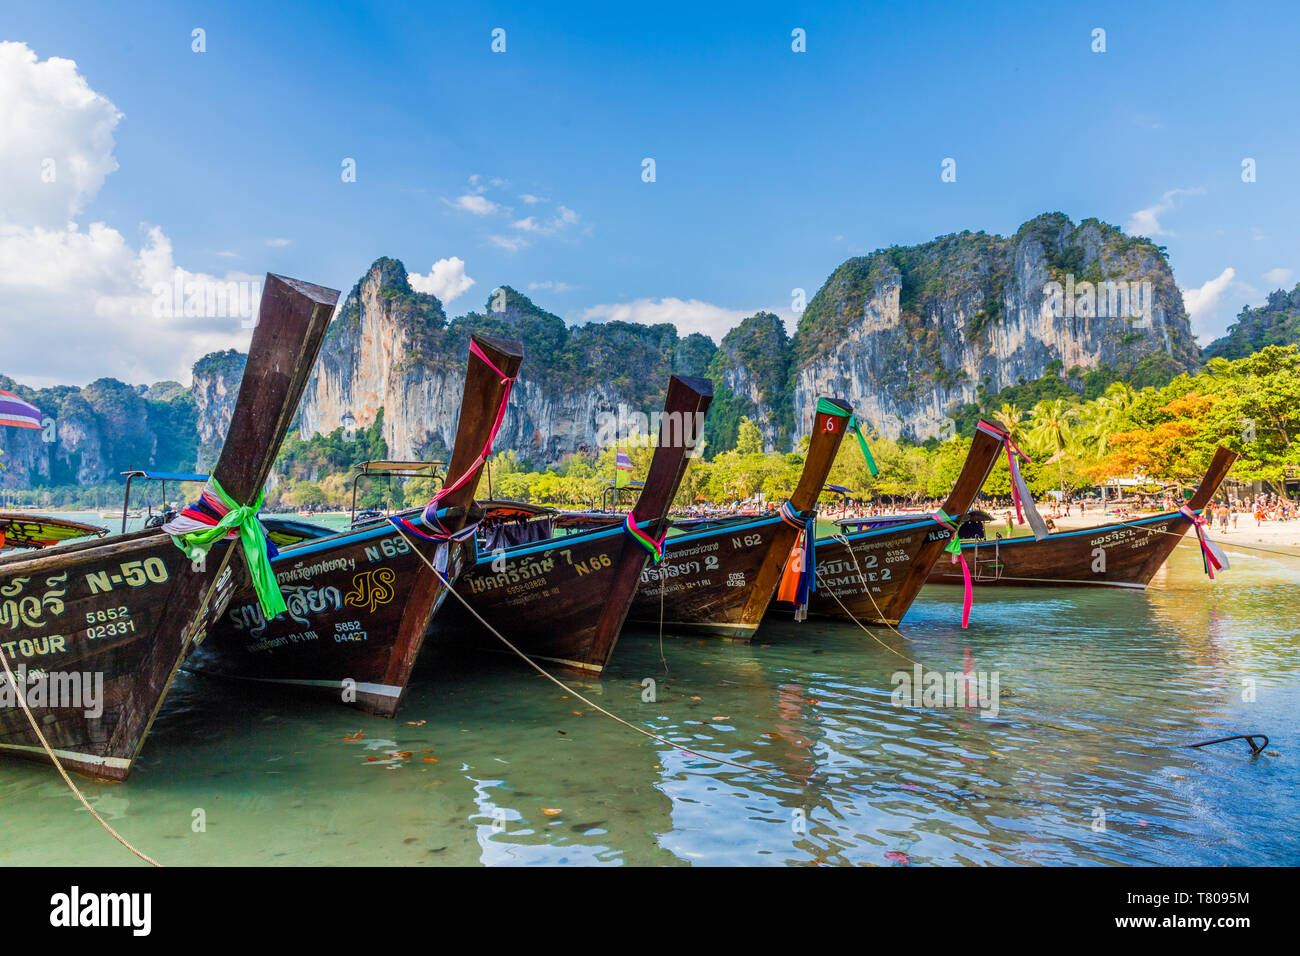 Long tail boats and karst scenery on Railay beach in Railay, Ao Nang, Krabi Province, Thailand, Southeast Asia, Asia Stock Photo